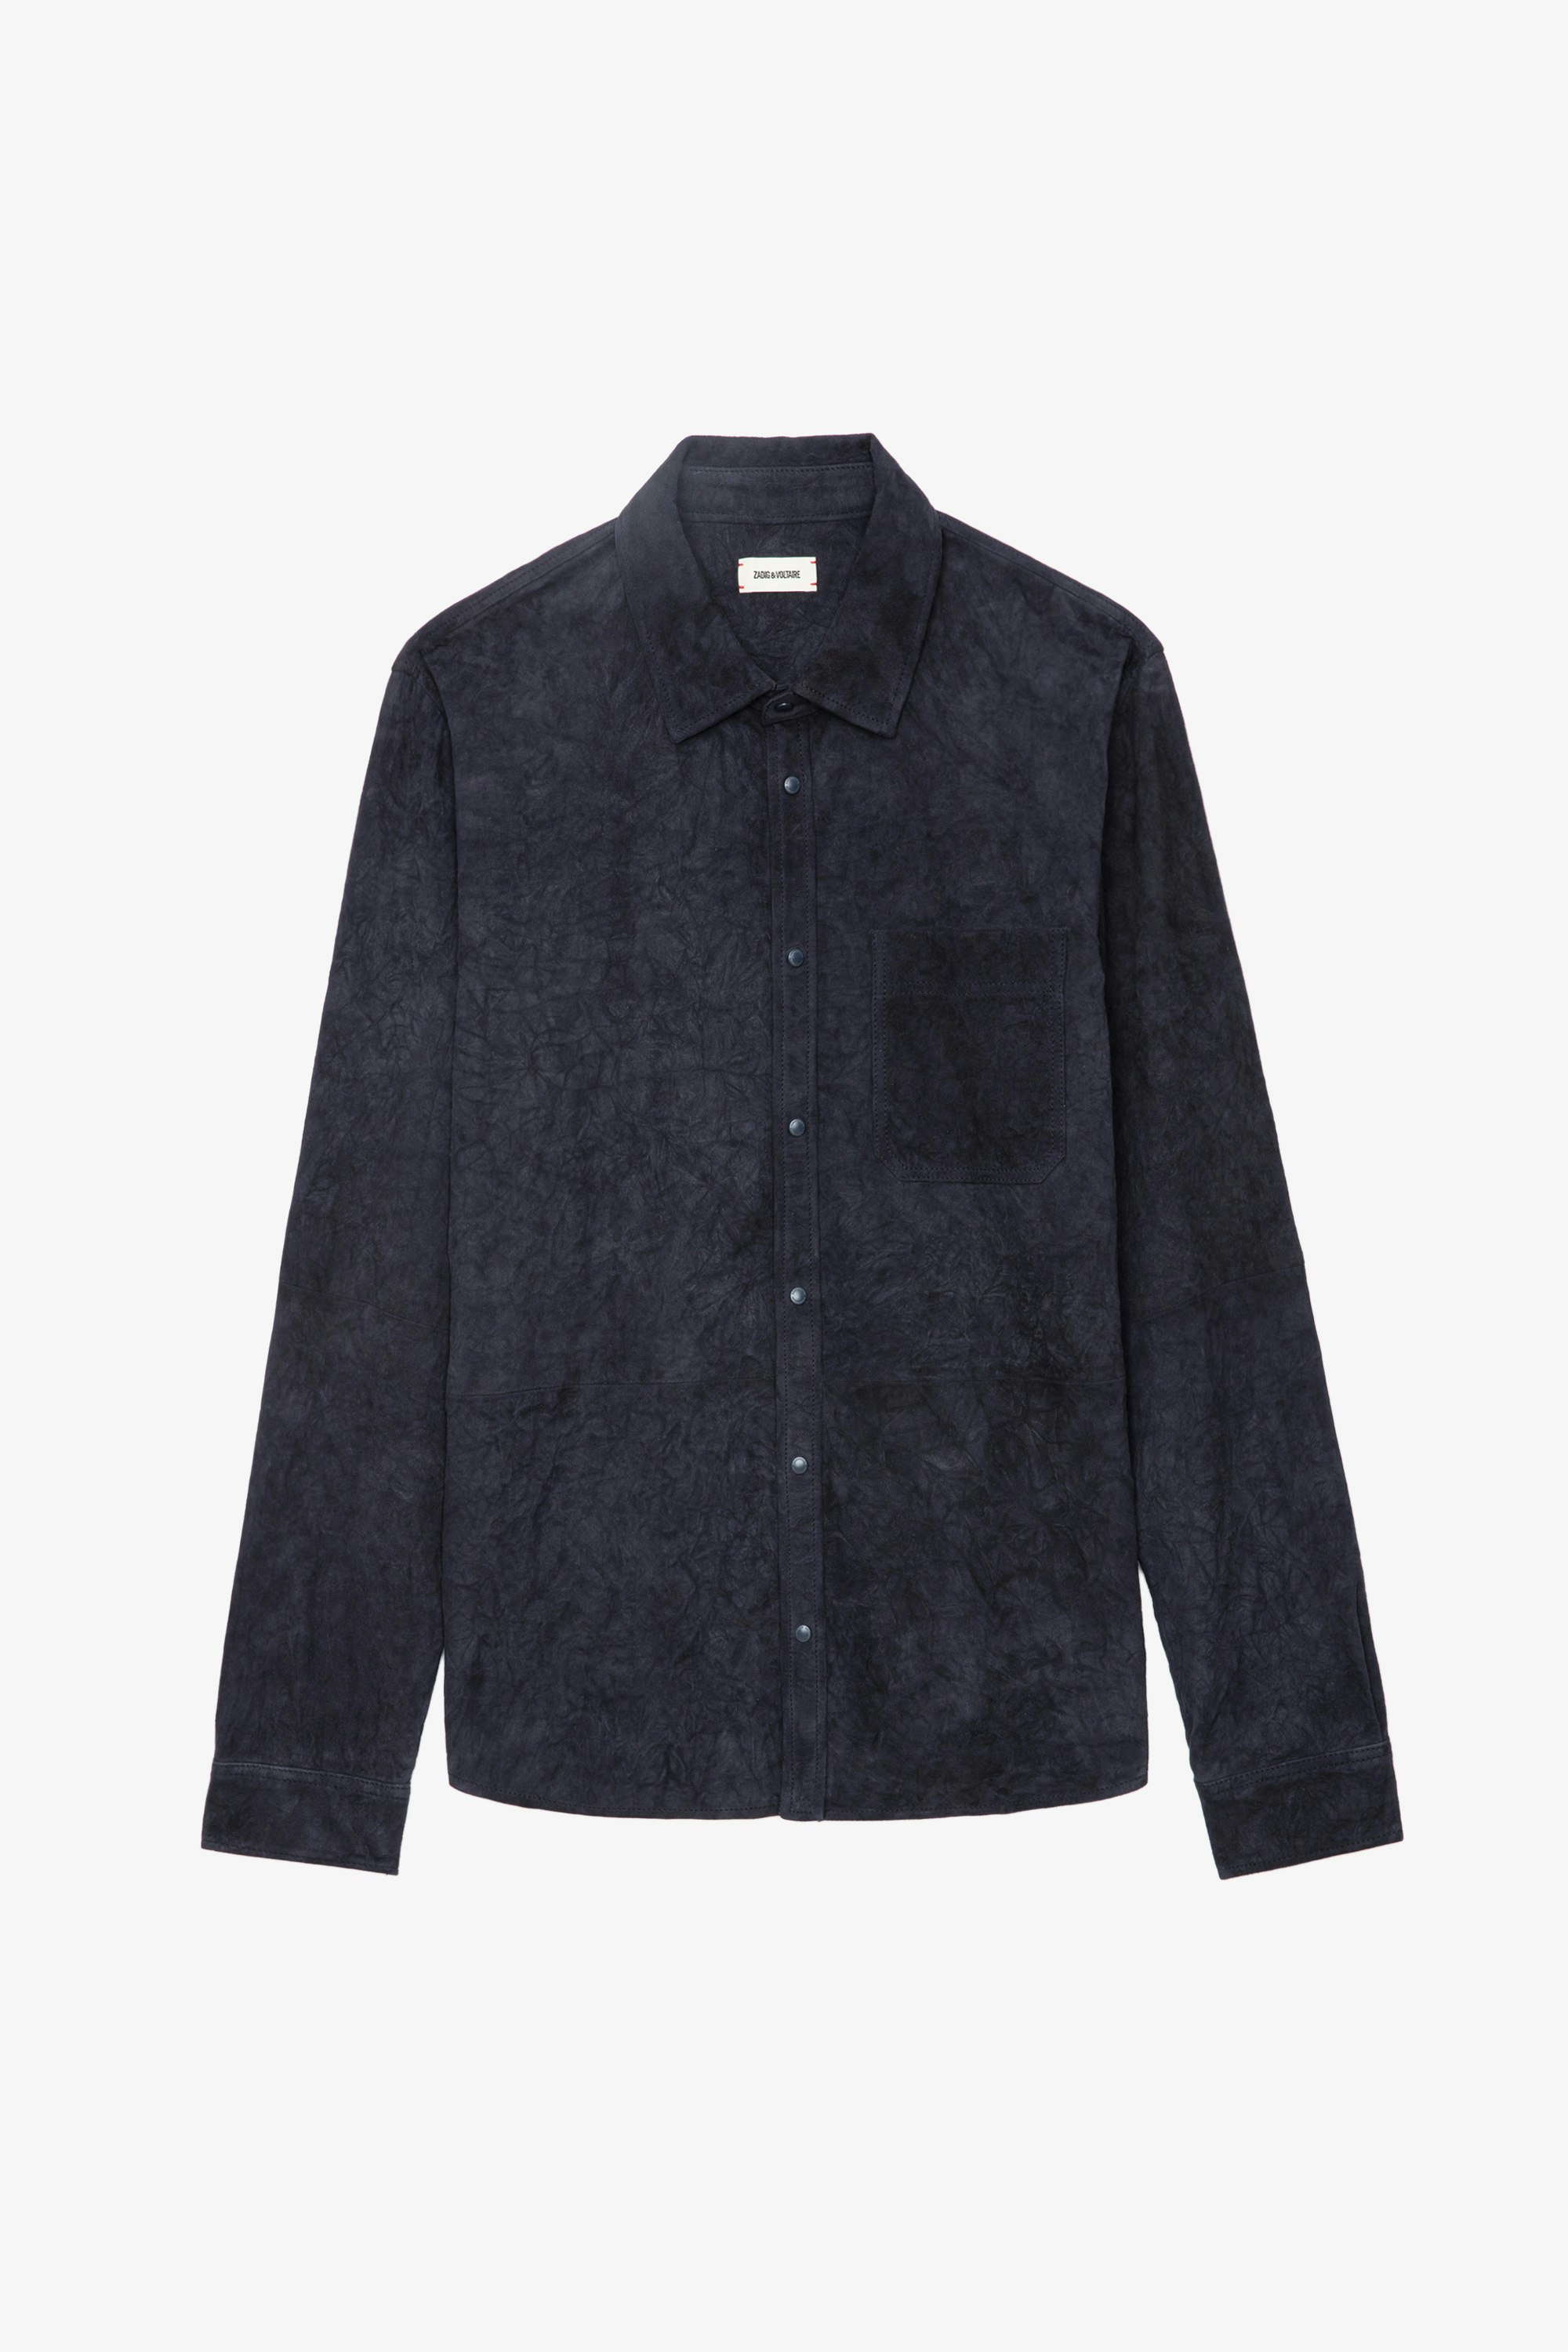 Serge Suede Shirt - Navy blue crinkled suede long-sleeved shirt with button closure.